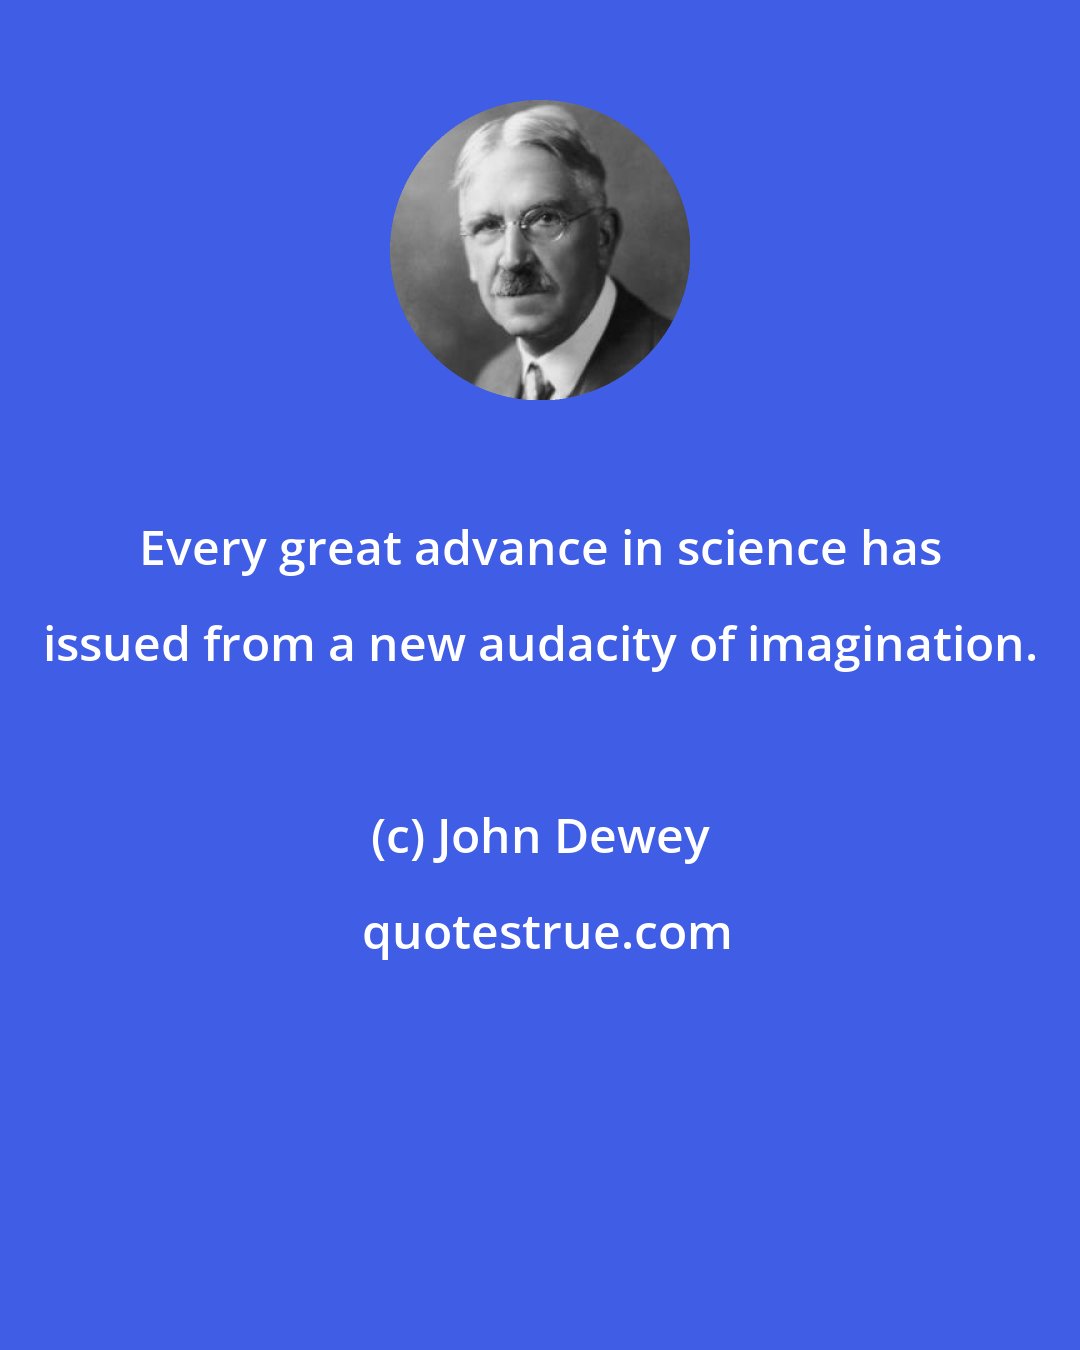 John Dewey: Every great advance in science has issued from a new audacity of imagination.